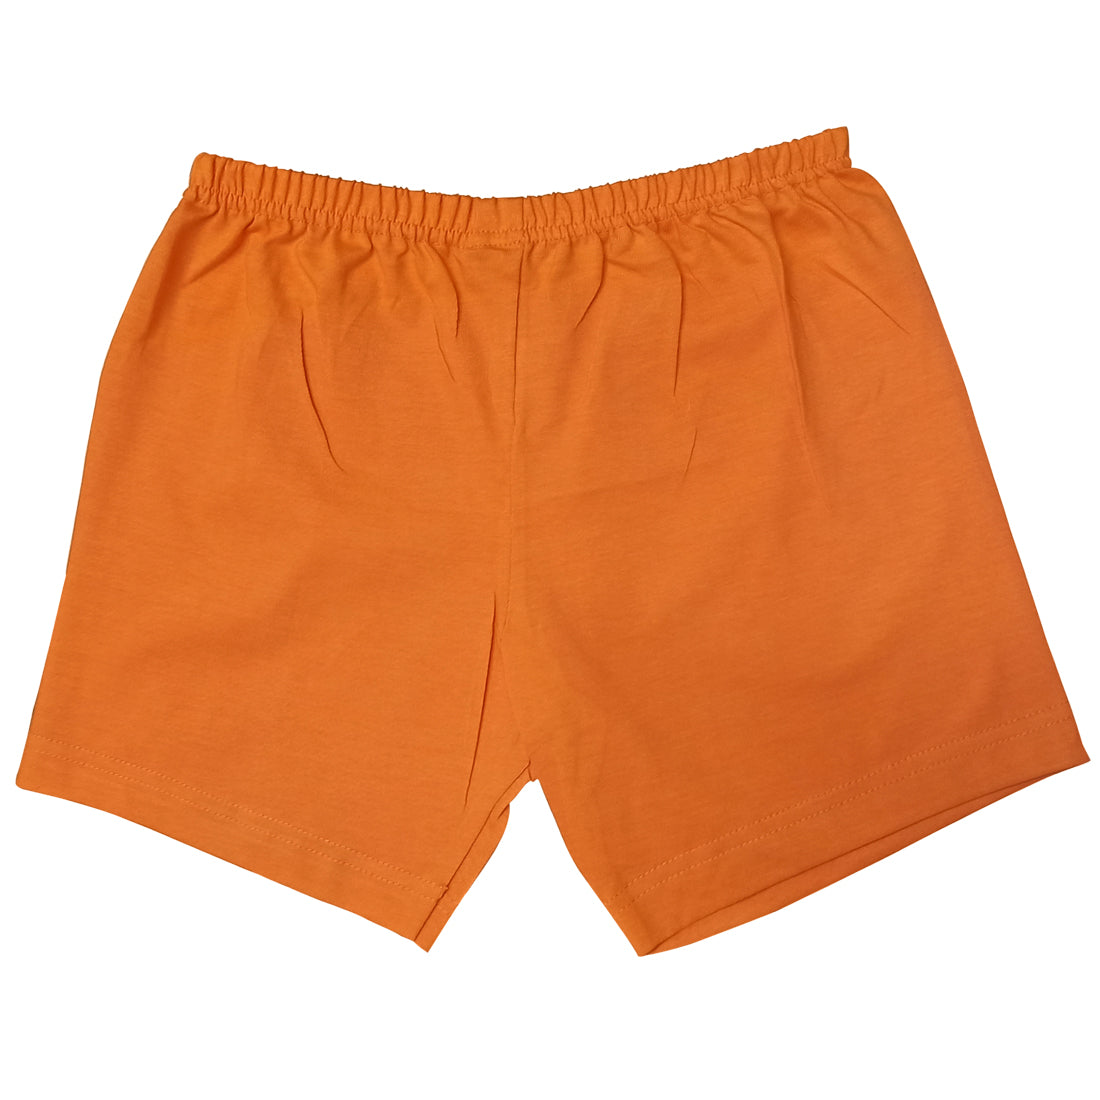 Crazy Shorts For kids